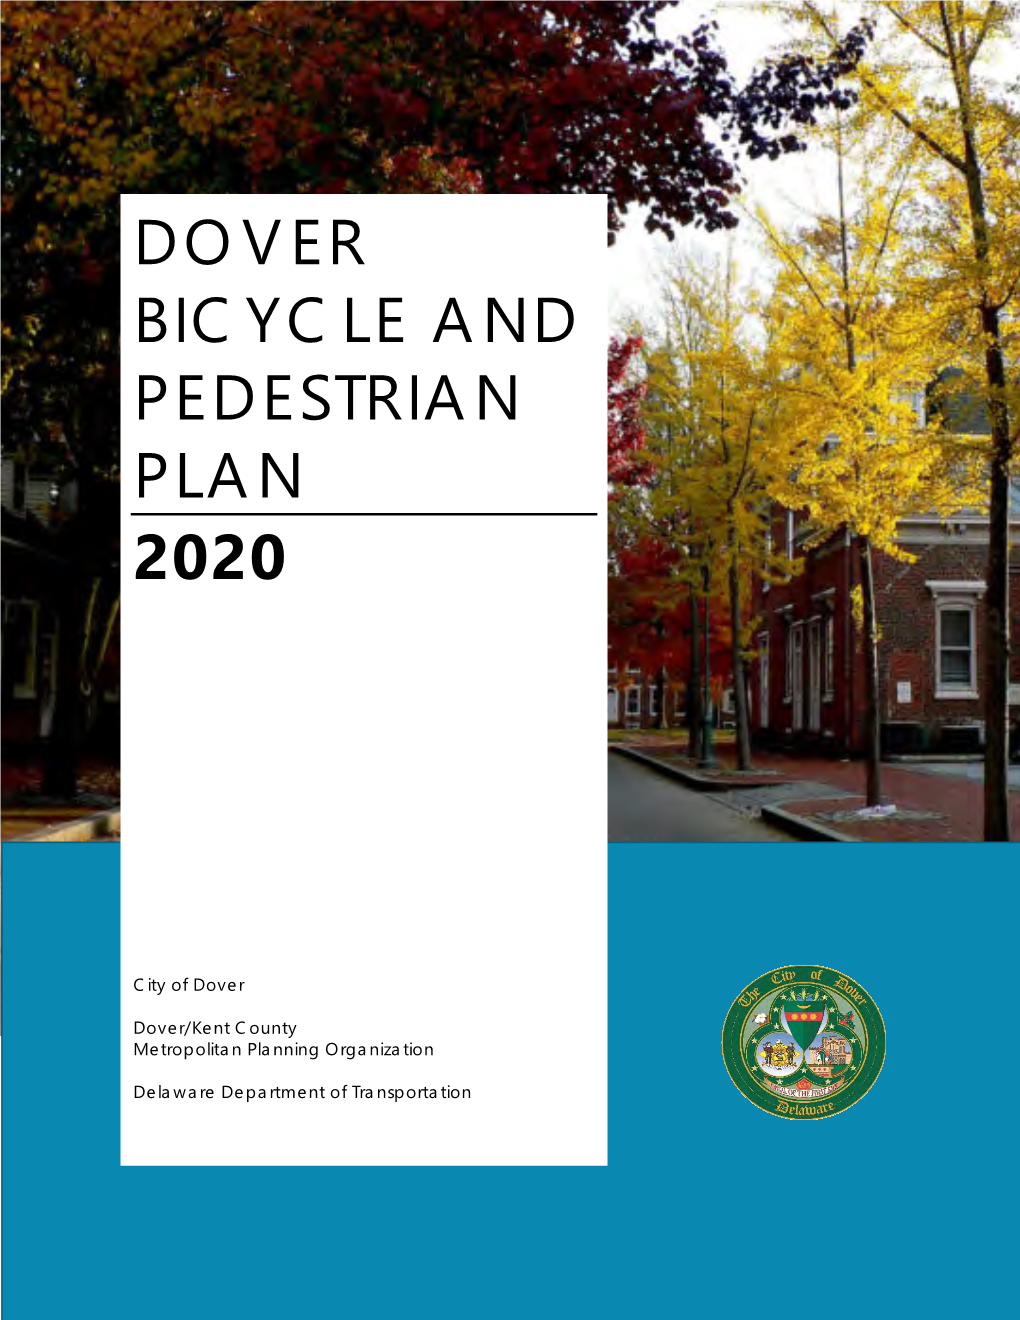 Dover Bicycle and Pedestrian Plan 2020